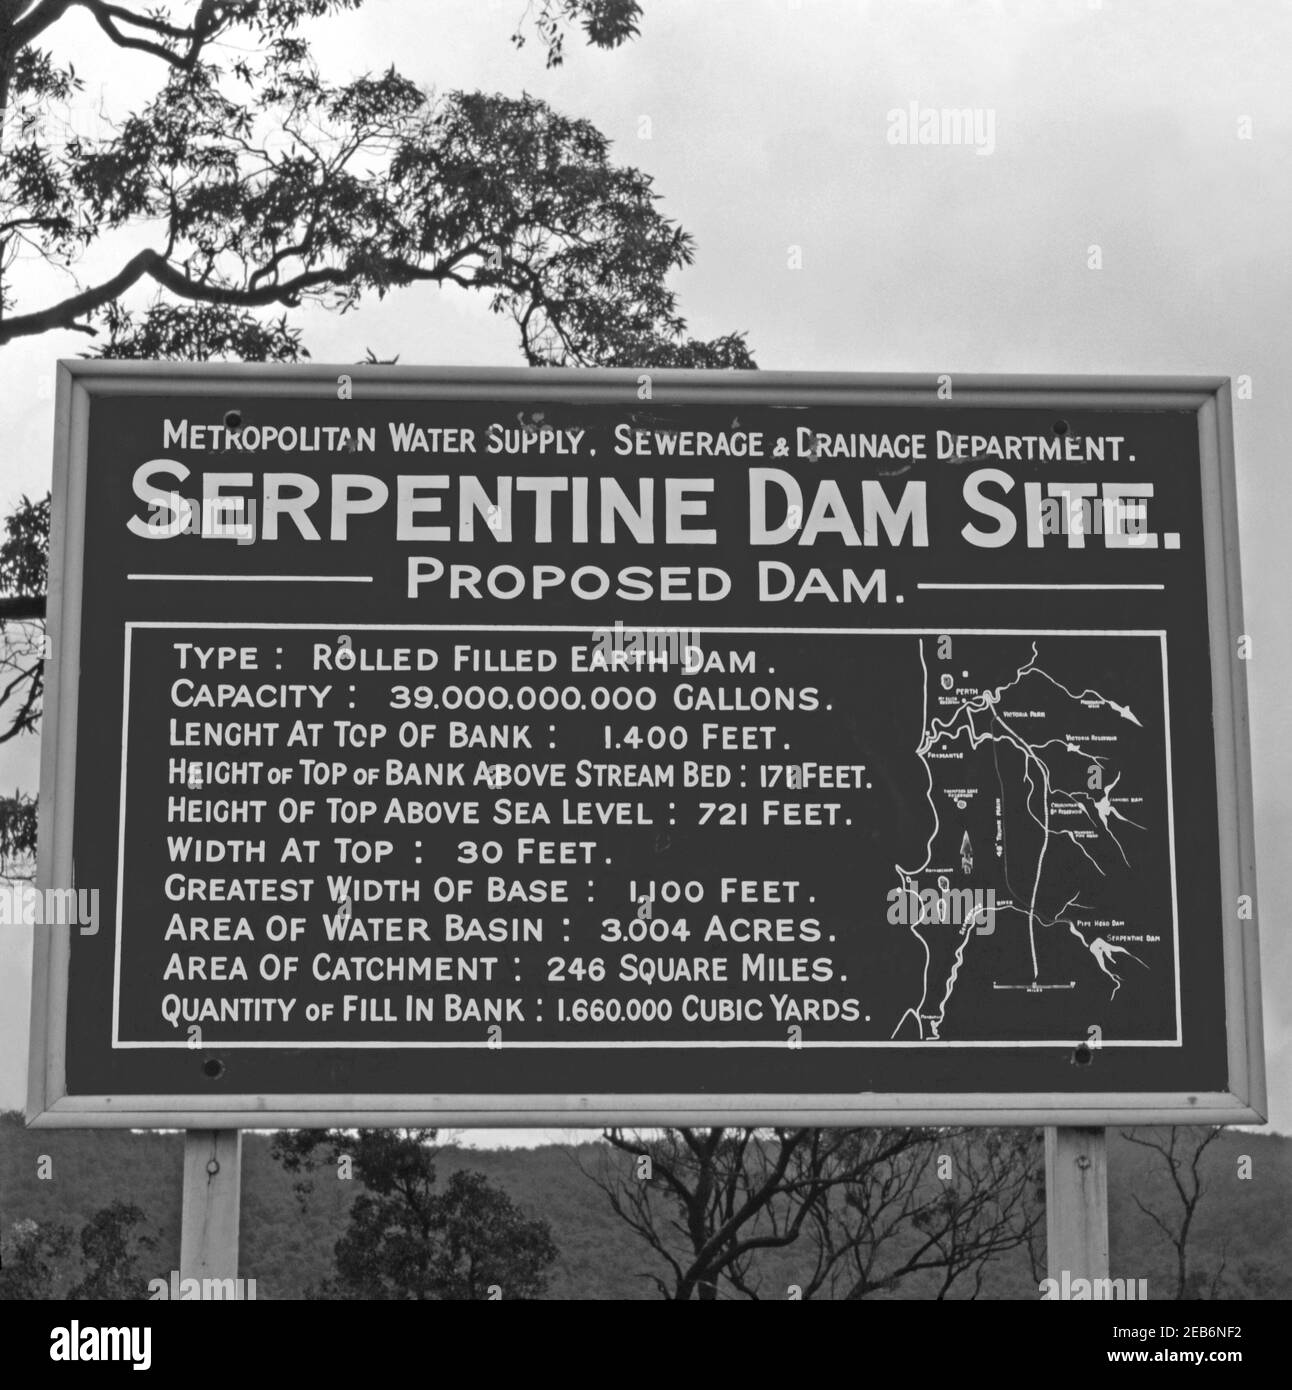 A sign indicating the location of the Sepentine Dam site, Serpentine, Western Australia, Australia c. 1958. Construction of the dam was completed in 1961. The dam’s reservoir is used to store water that is released to feed water to the metropolitan trunk main network. The Serpentine Dam is one of the 15 dams (some of which have since been decommissioned) that were built in WA since the 1920s – part of the Integrated Water Supply Scheme (IWSS), which provides water for over two million people in Perth, Mandurah, and other Western Australian regions. Stock Photo